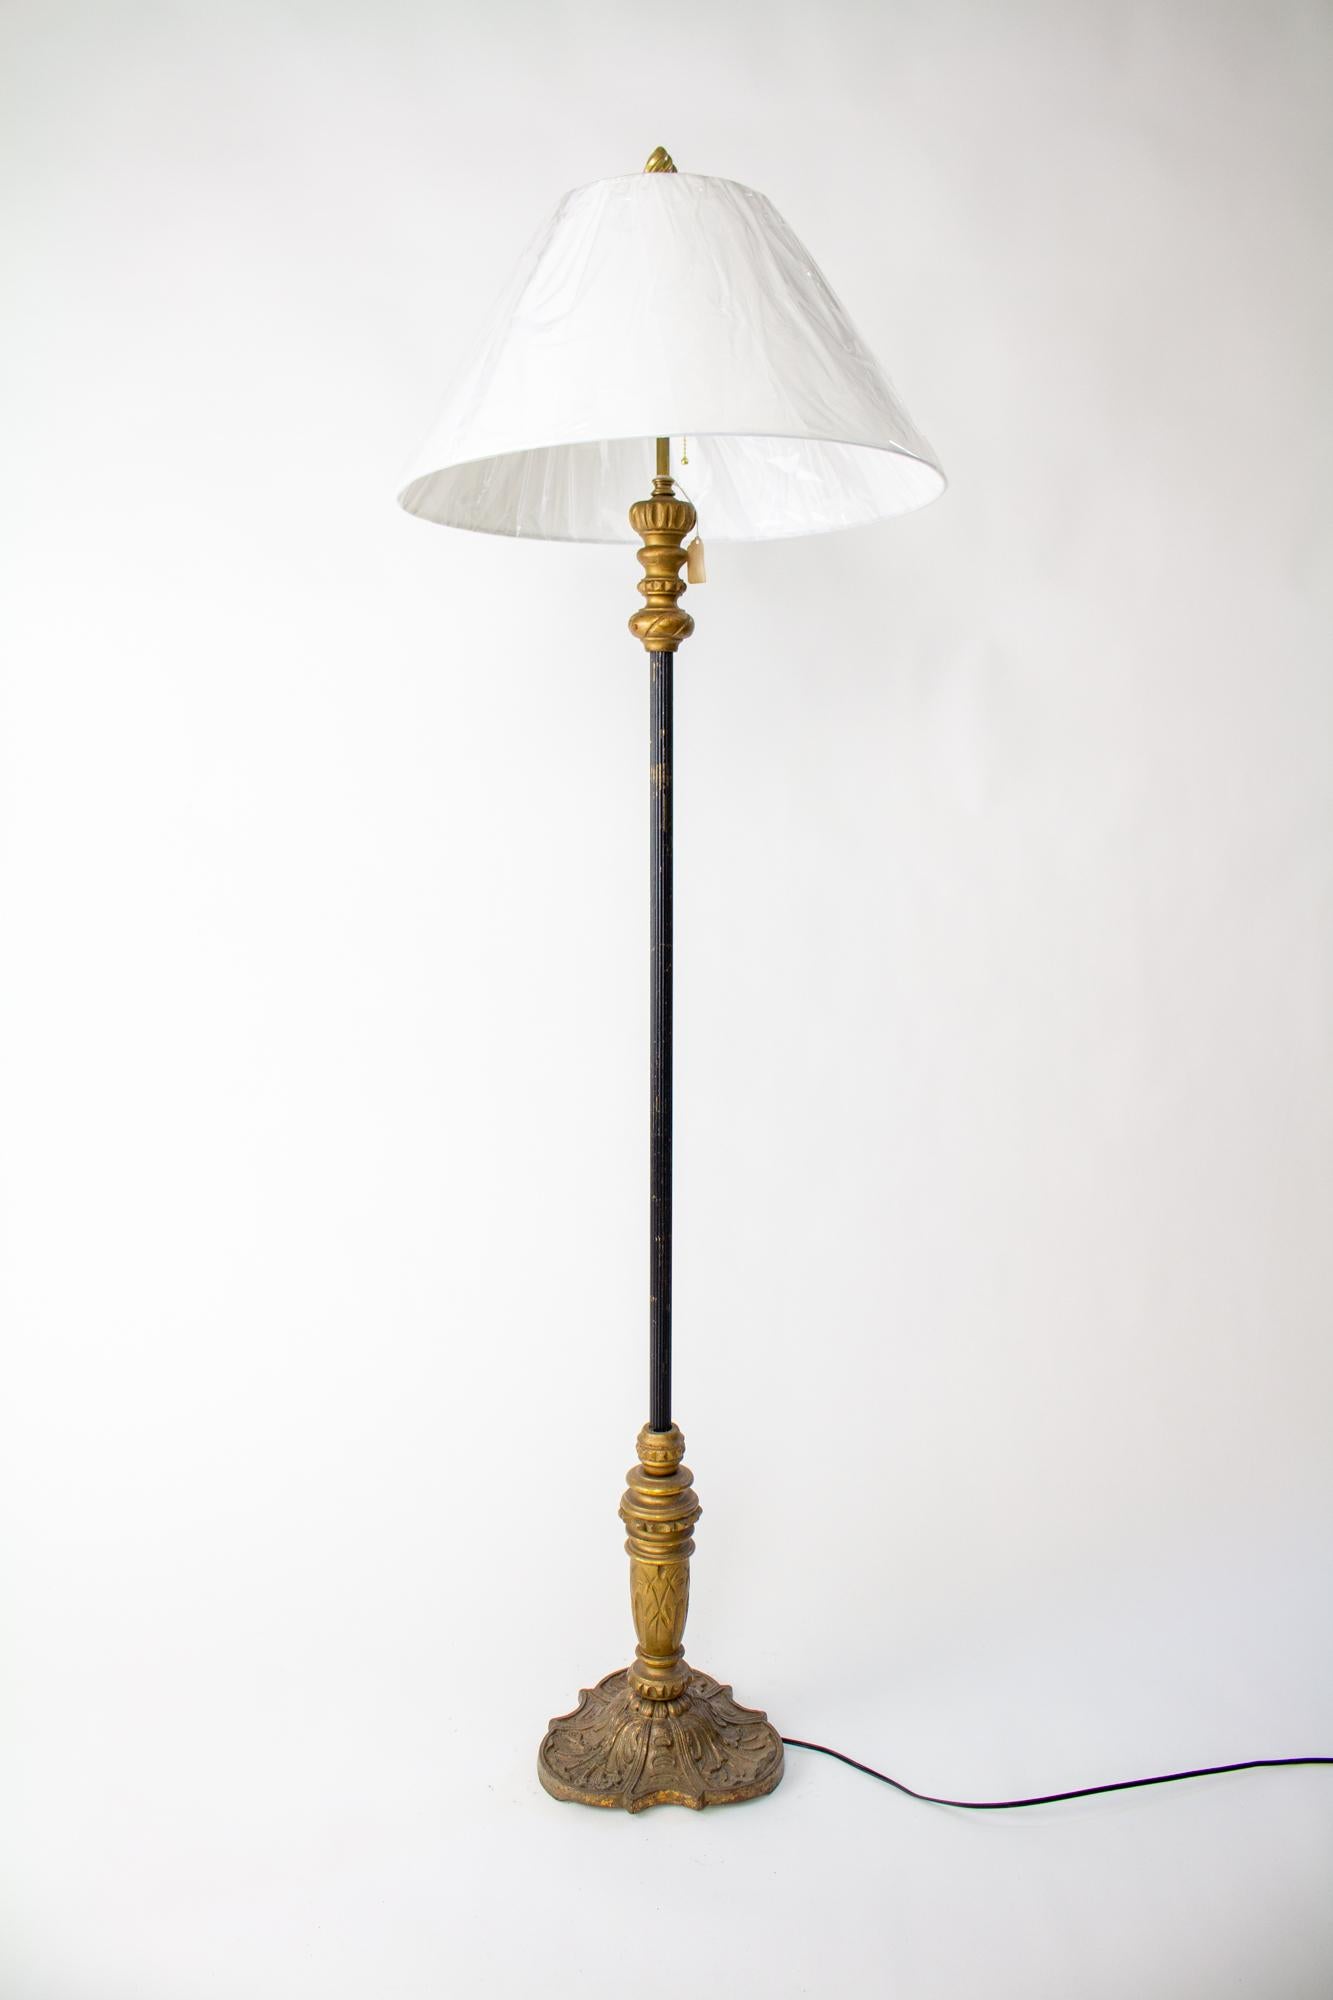 Early 20th Century giltwood and metal floor lamp with two light cluster. Spanish Revival style, would accent a space with victorian, revival, or bohemian styling. Giltwood with original finish, in a dark antique gold with some wear due to its age.